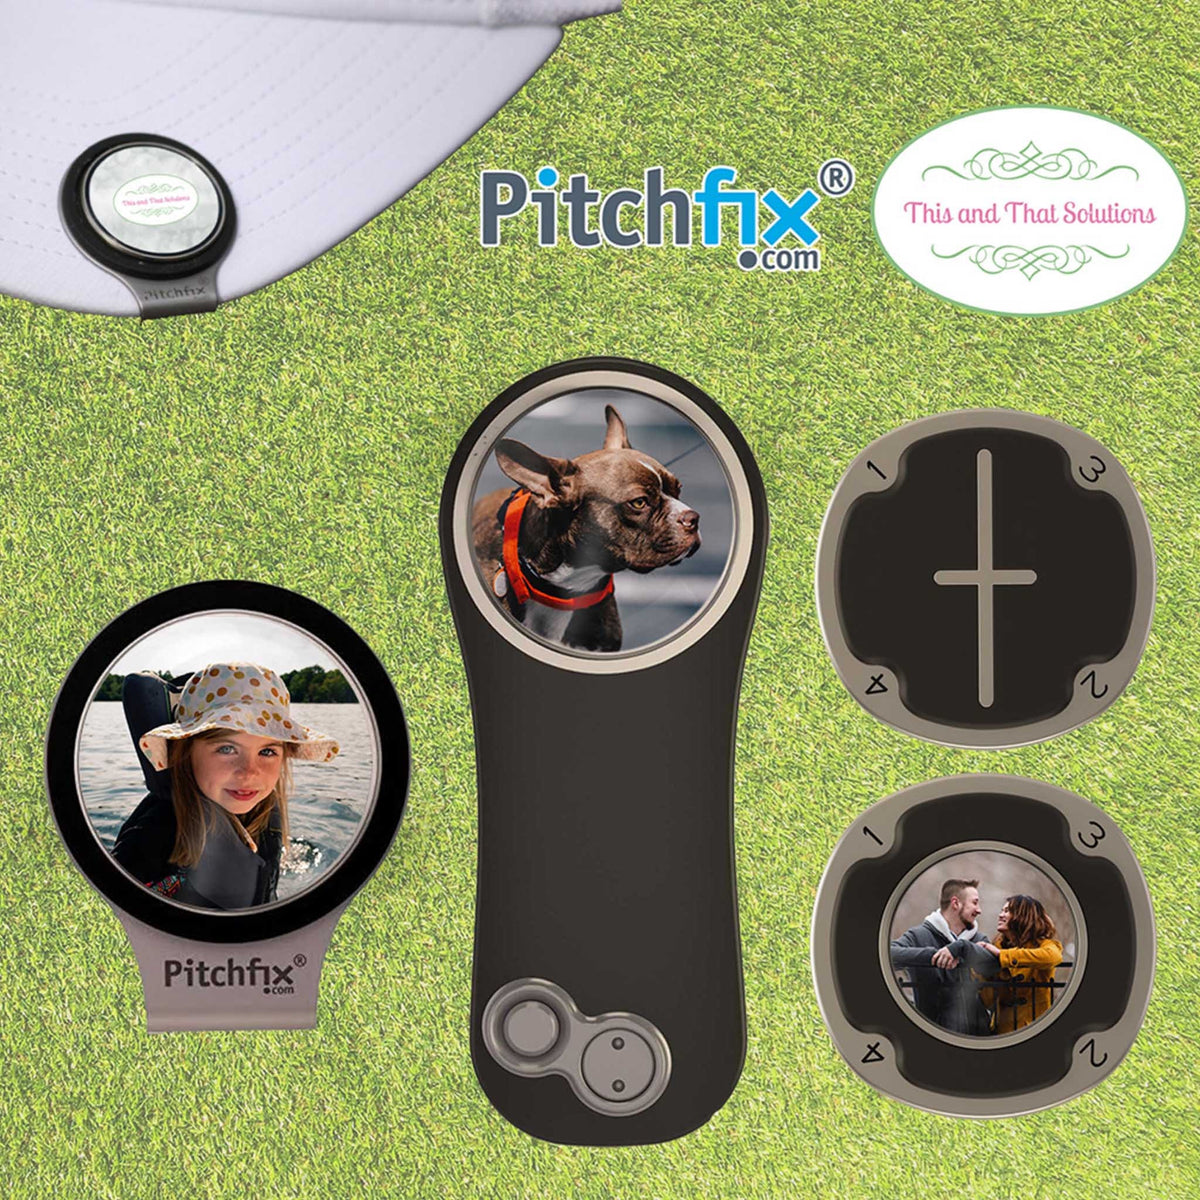 Personalized PitchFix MultiMarker Tool | Custom Ball Markers | Golf Gifts | Custom Photo Family